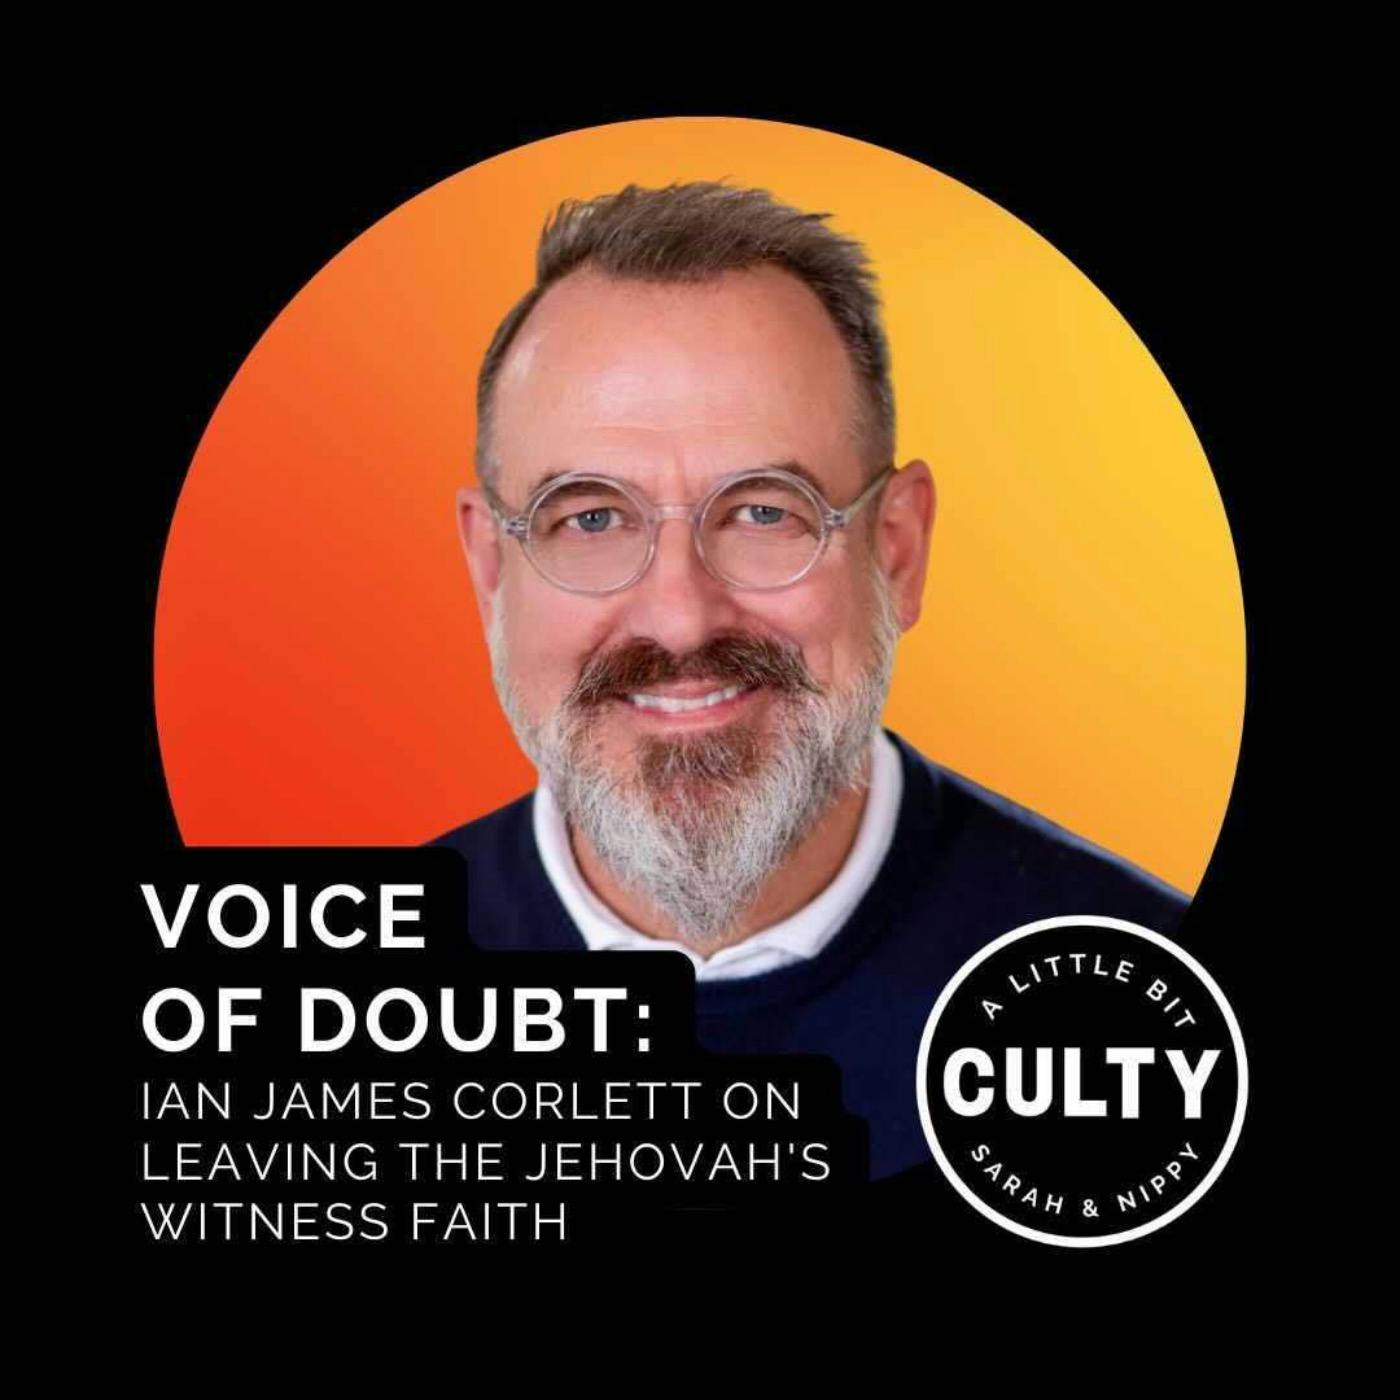 Voicing Doubt: Ian James Corlett on Leaving the Jehovah’s Witness Faith